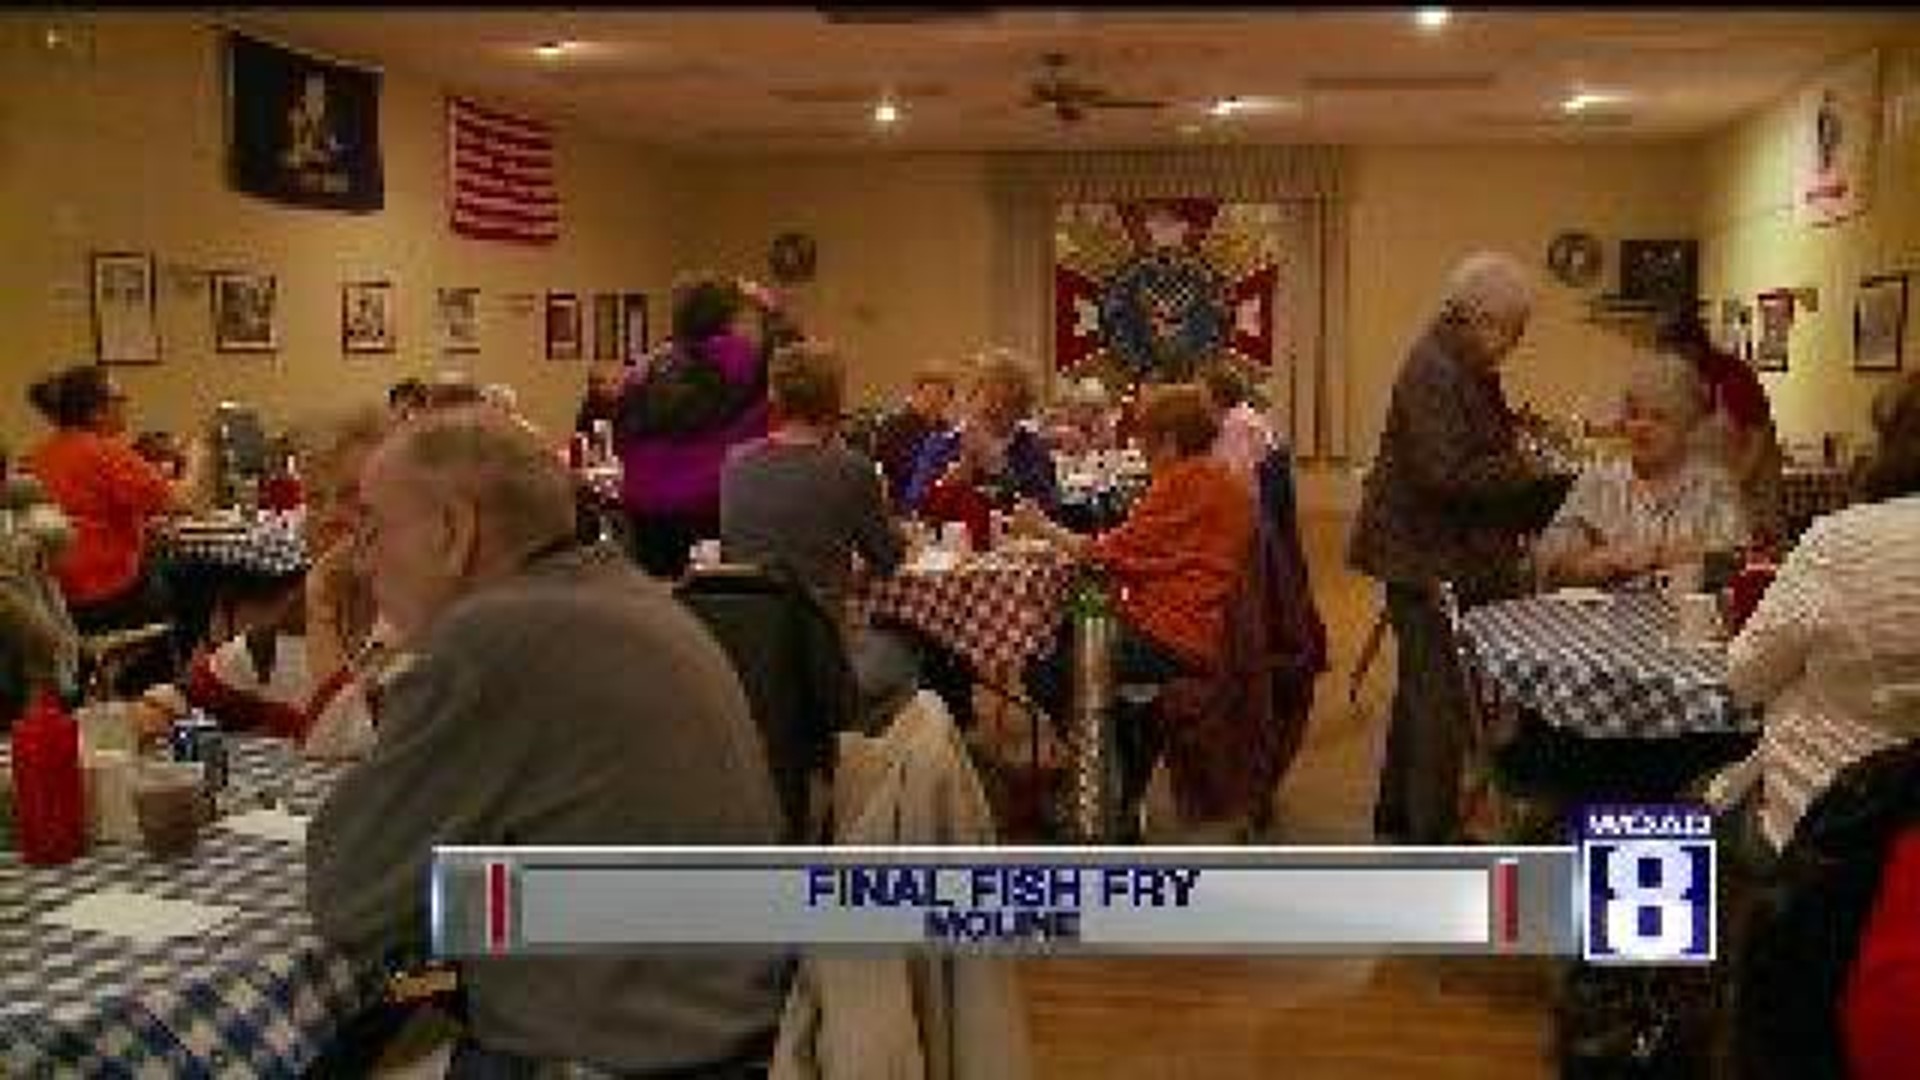 Post holds final fish fry